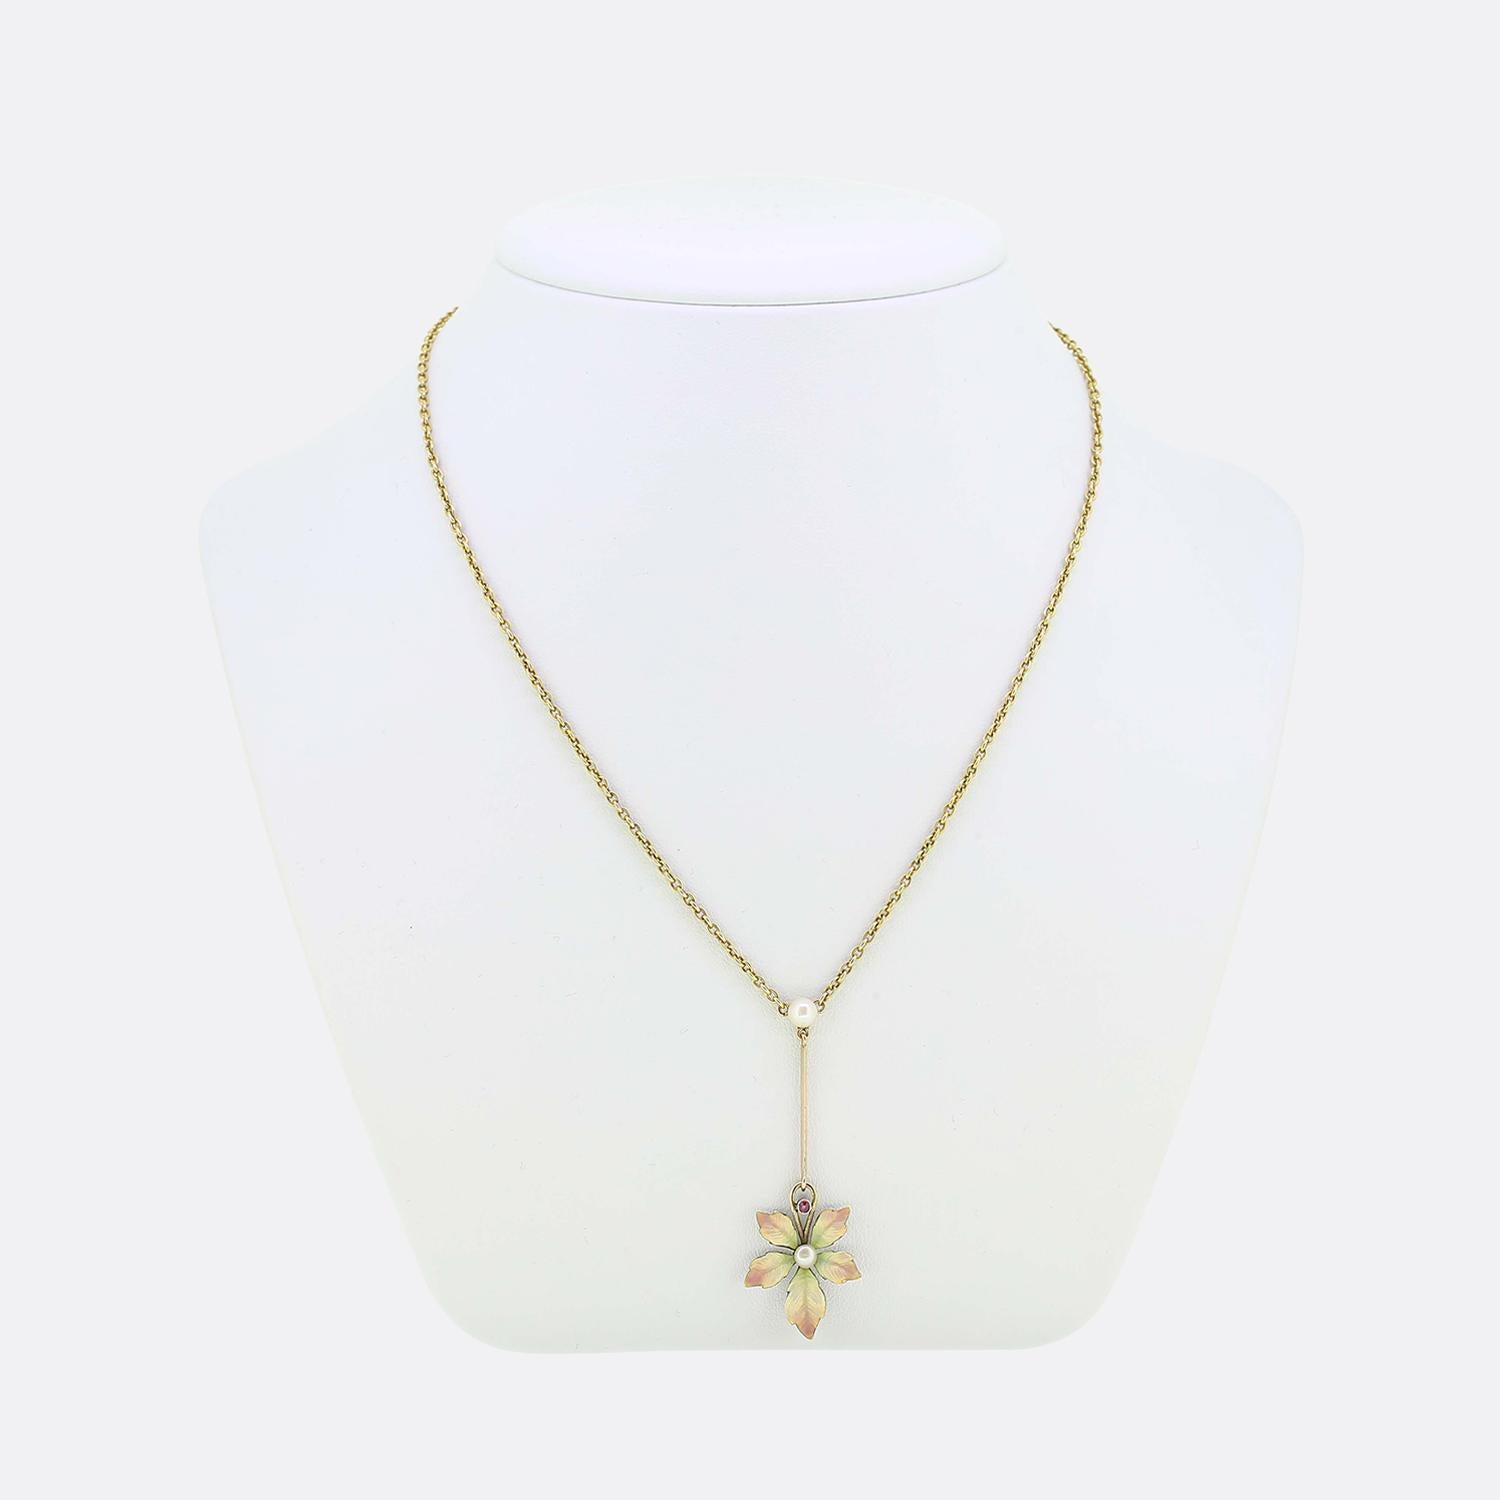 Here we have a truly beautiful early Art Nouveau necklace. This antique piece has been crafted from 15ct gold with a rounded natural pearl at the centre playing host a knife edge bar below which suspends a highly decorated, iconic Art Nouveau floral